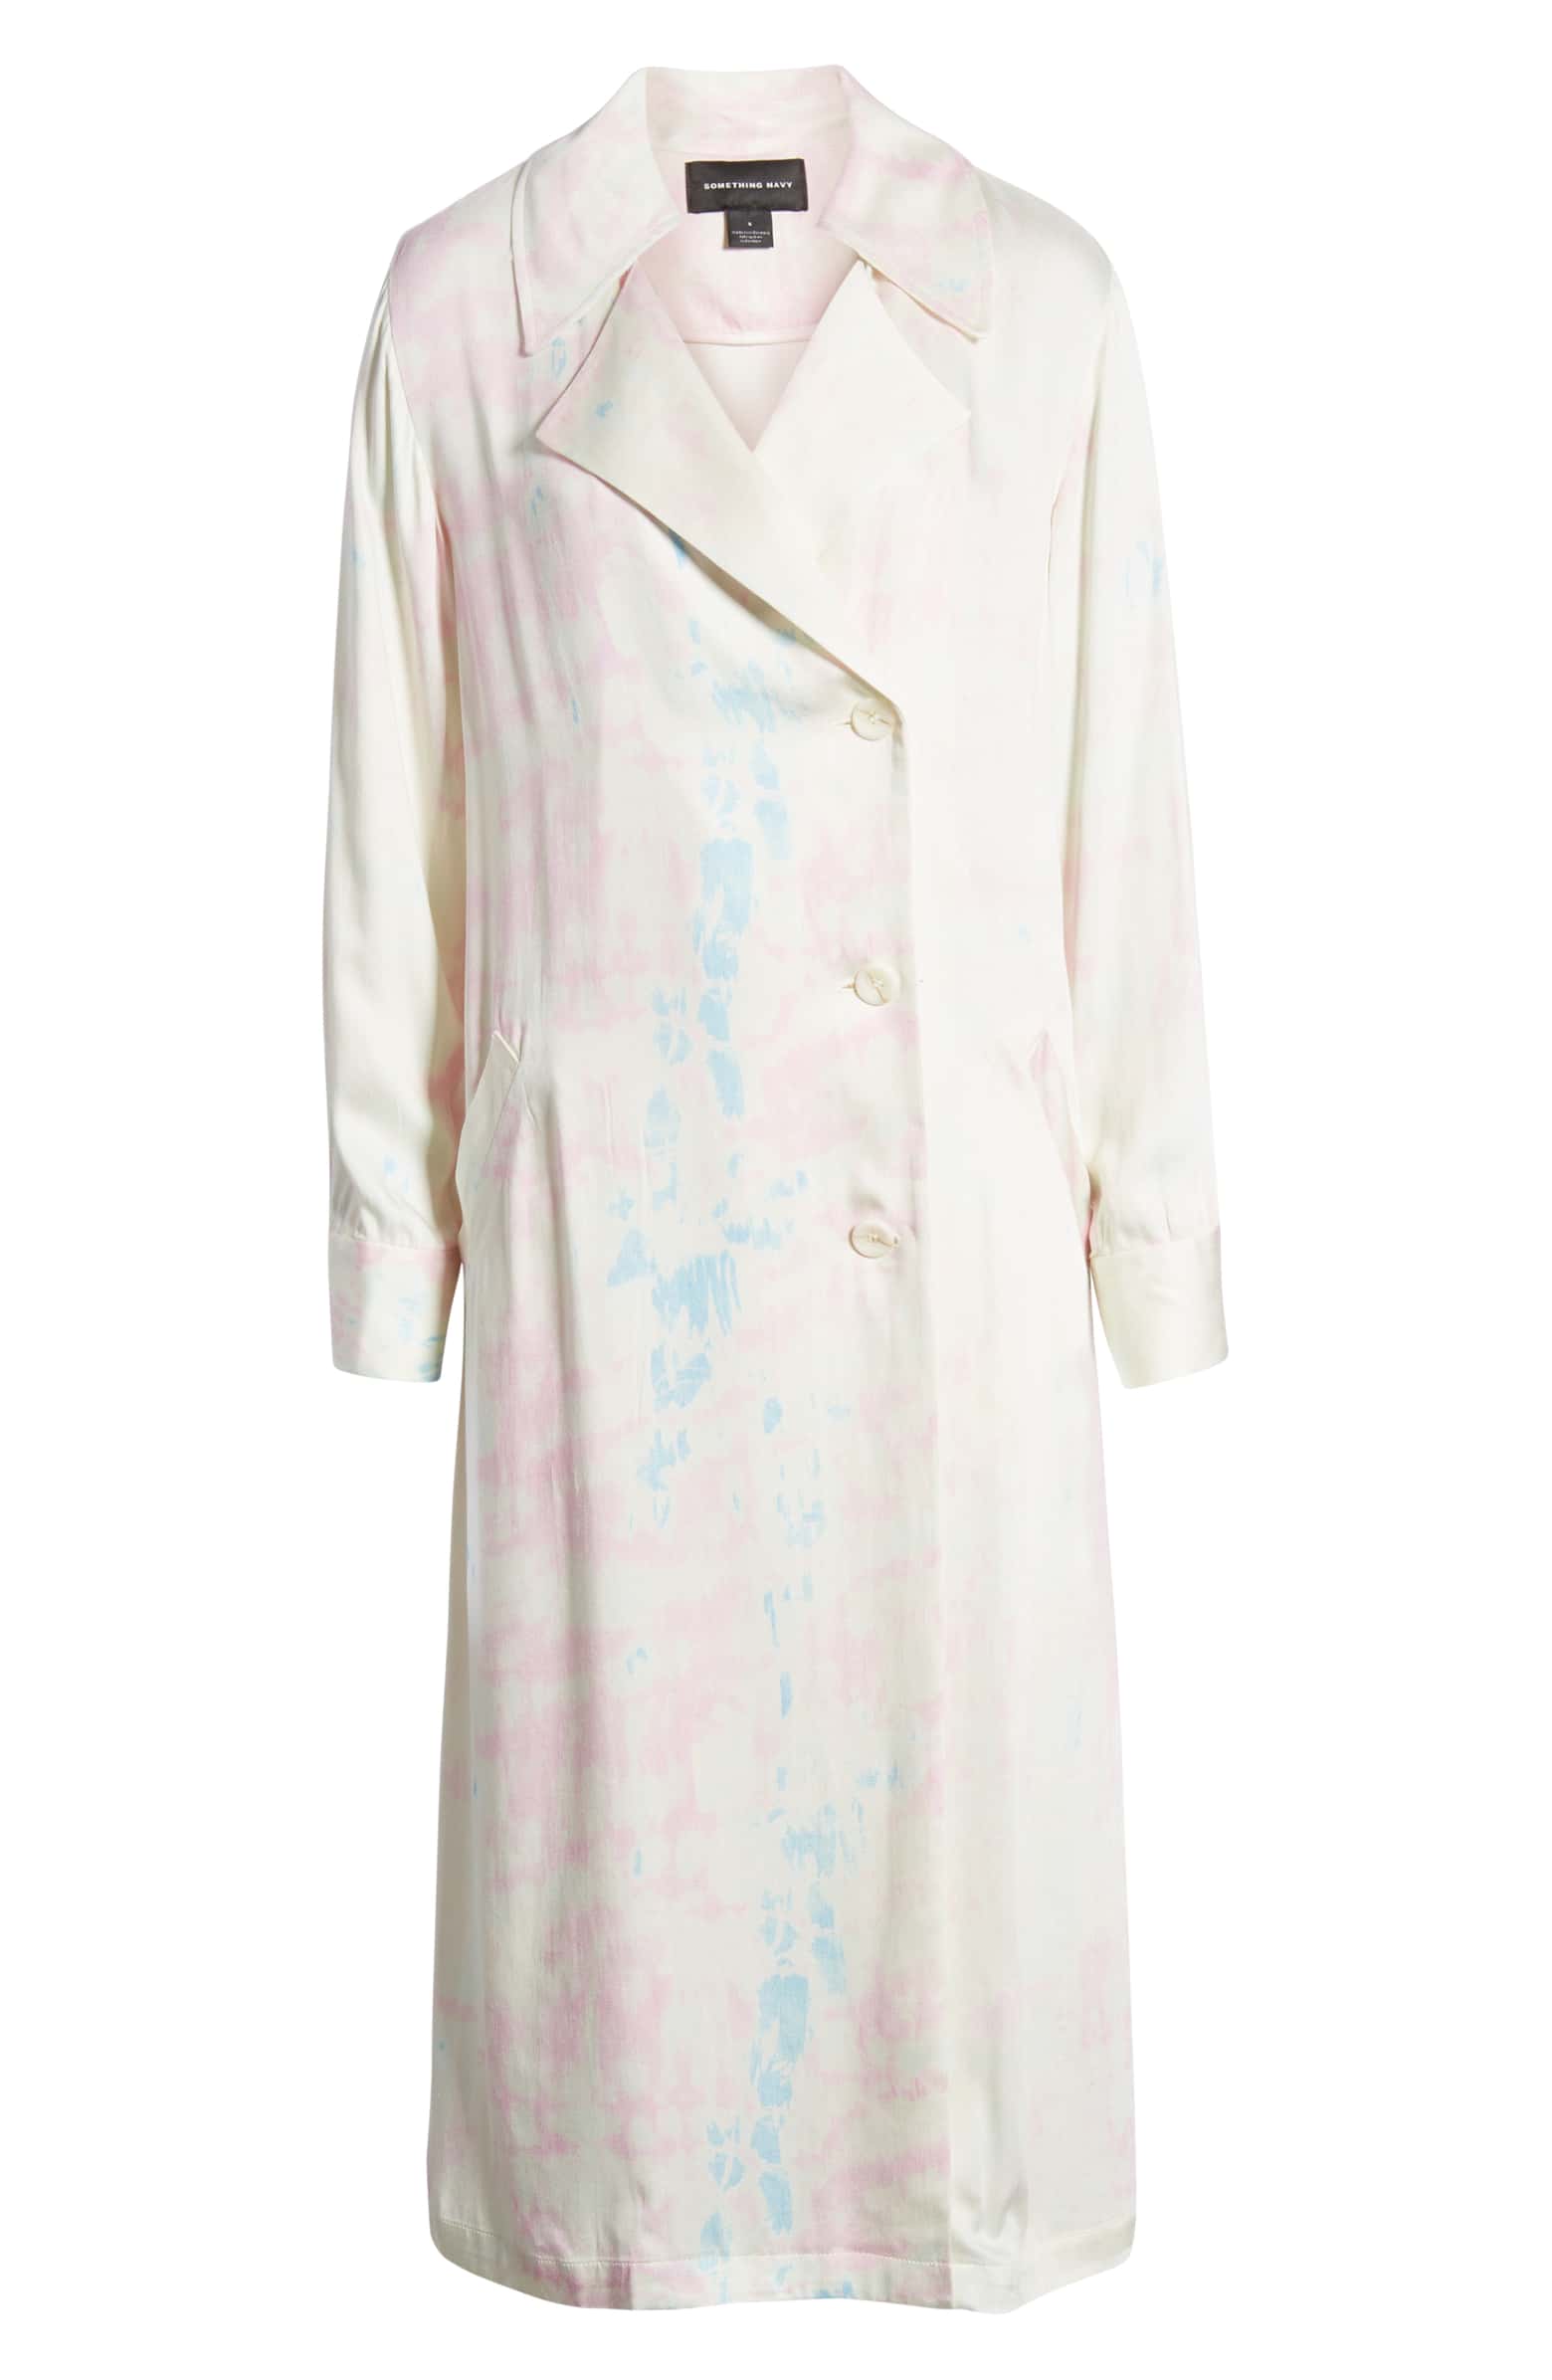 Tie-Dye Is Back And You Have To See These Chic Items To Believe It